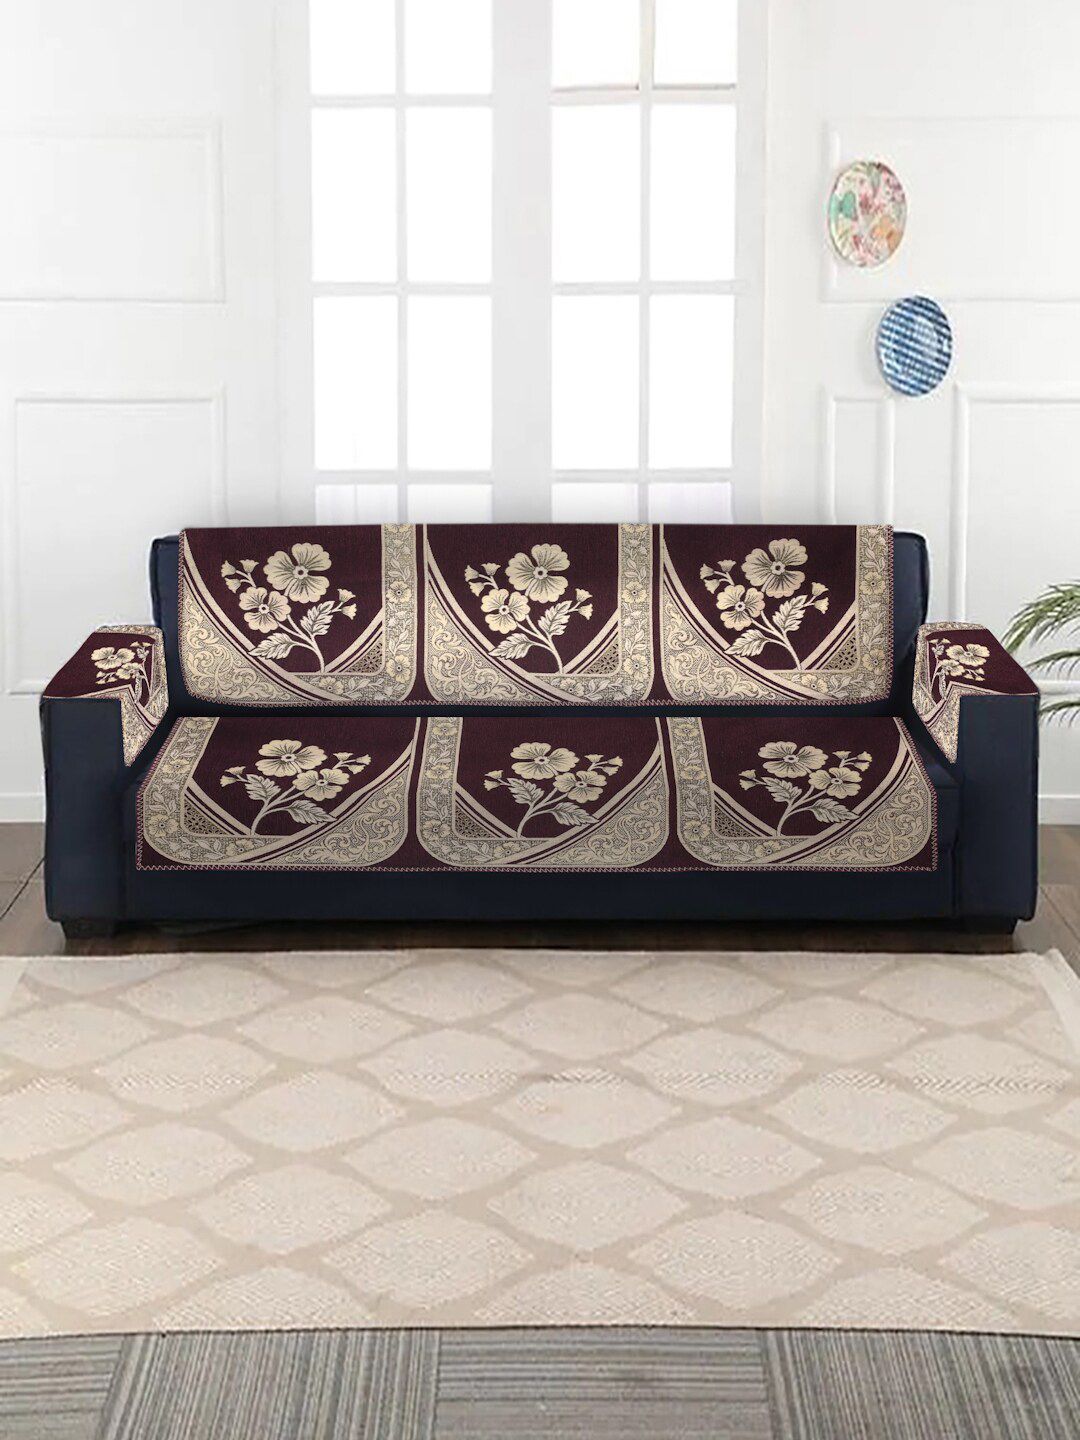 MULTITEX Set of 16 Maroon Jacquard 5 Seater Sofa Covers with Arm Covers Price in India